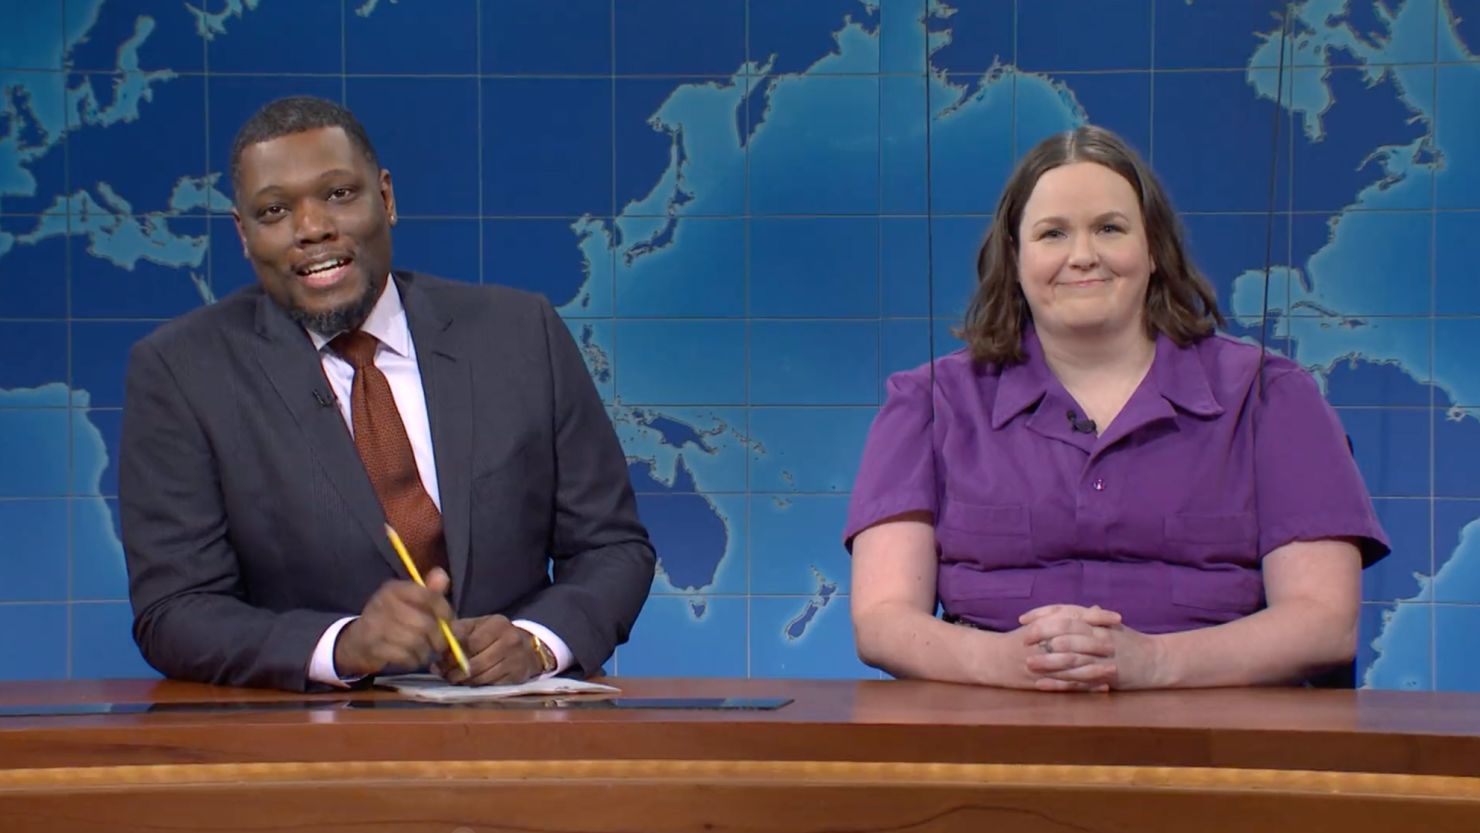 (From left) Michael Che and Molly Kearney during Weekend Update on April 15's episode of 'Saturday Night Live.'